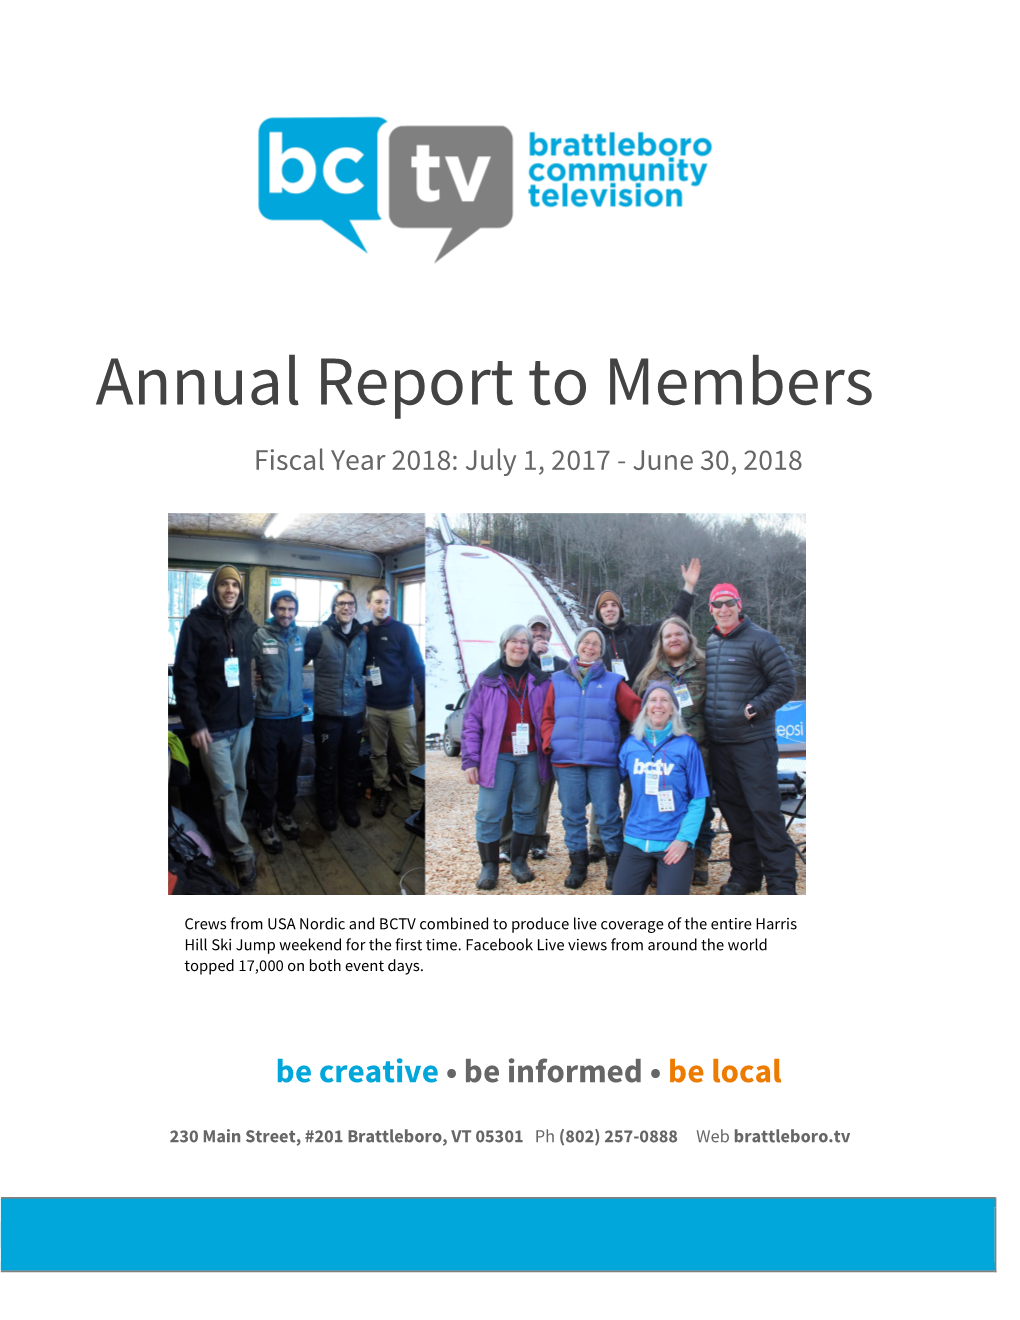 Annual Report to Members Fiscal Year 2018: July 1, 2017 - June 30, 2018